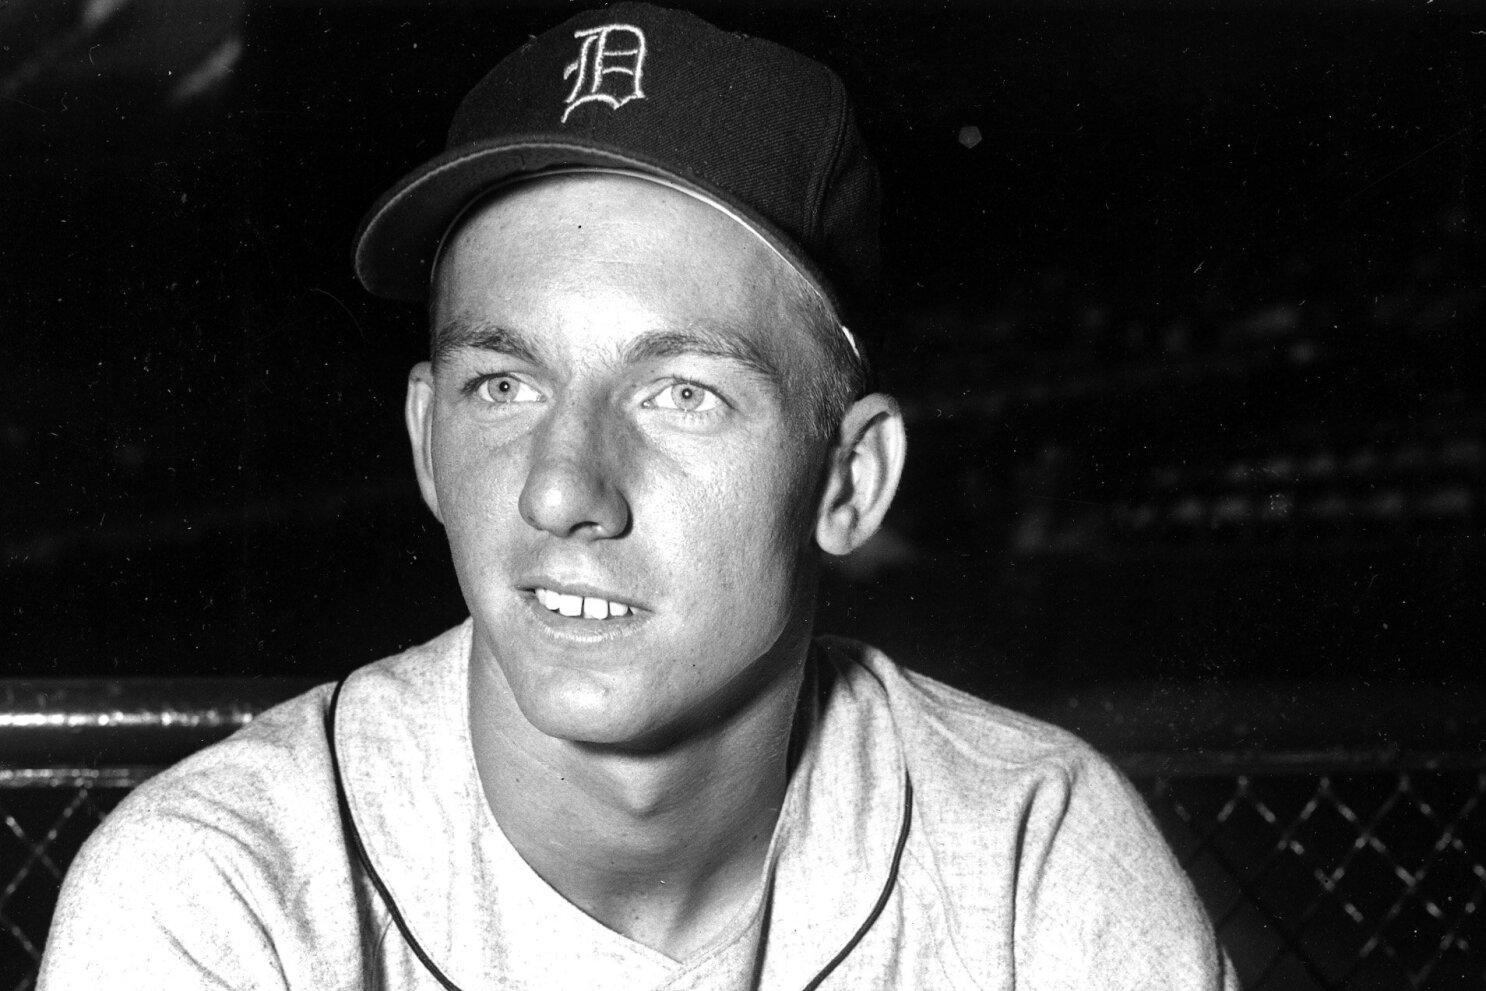 Photos: Al Kaline's iconic moments from Tigers' 1970s team